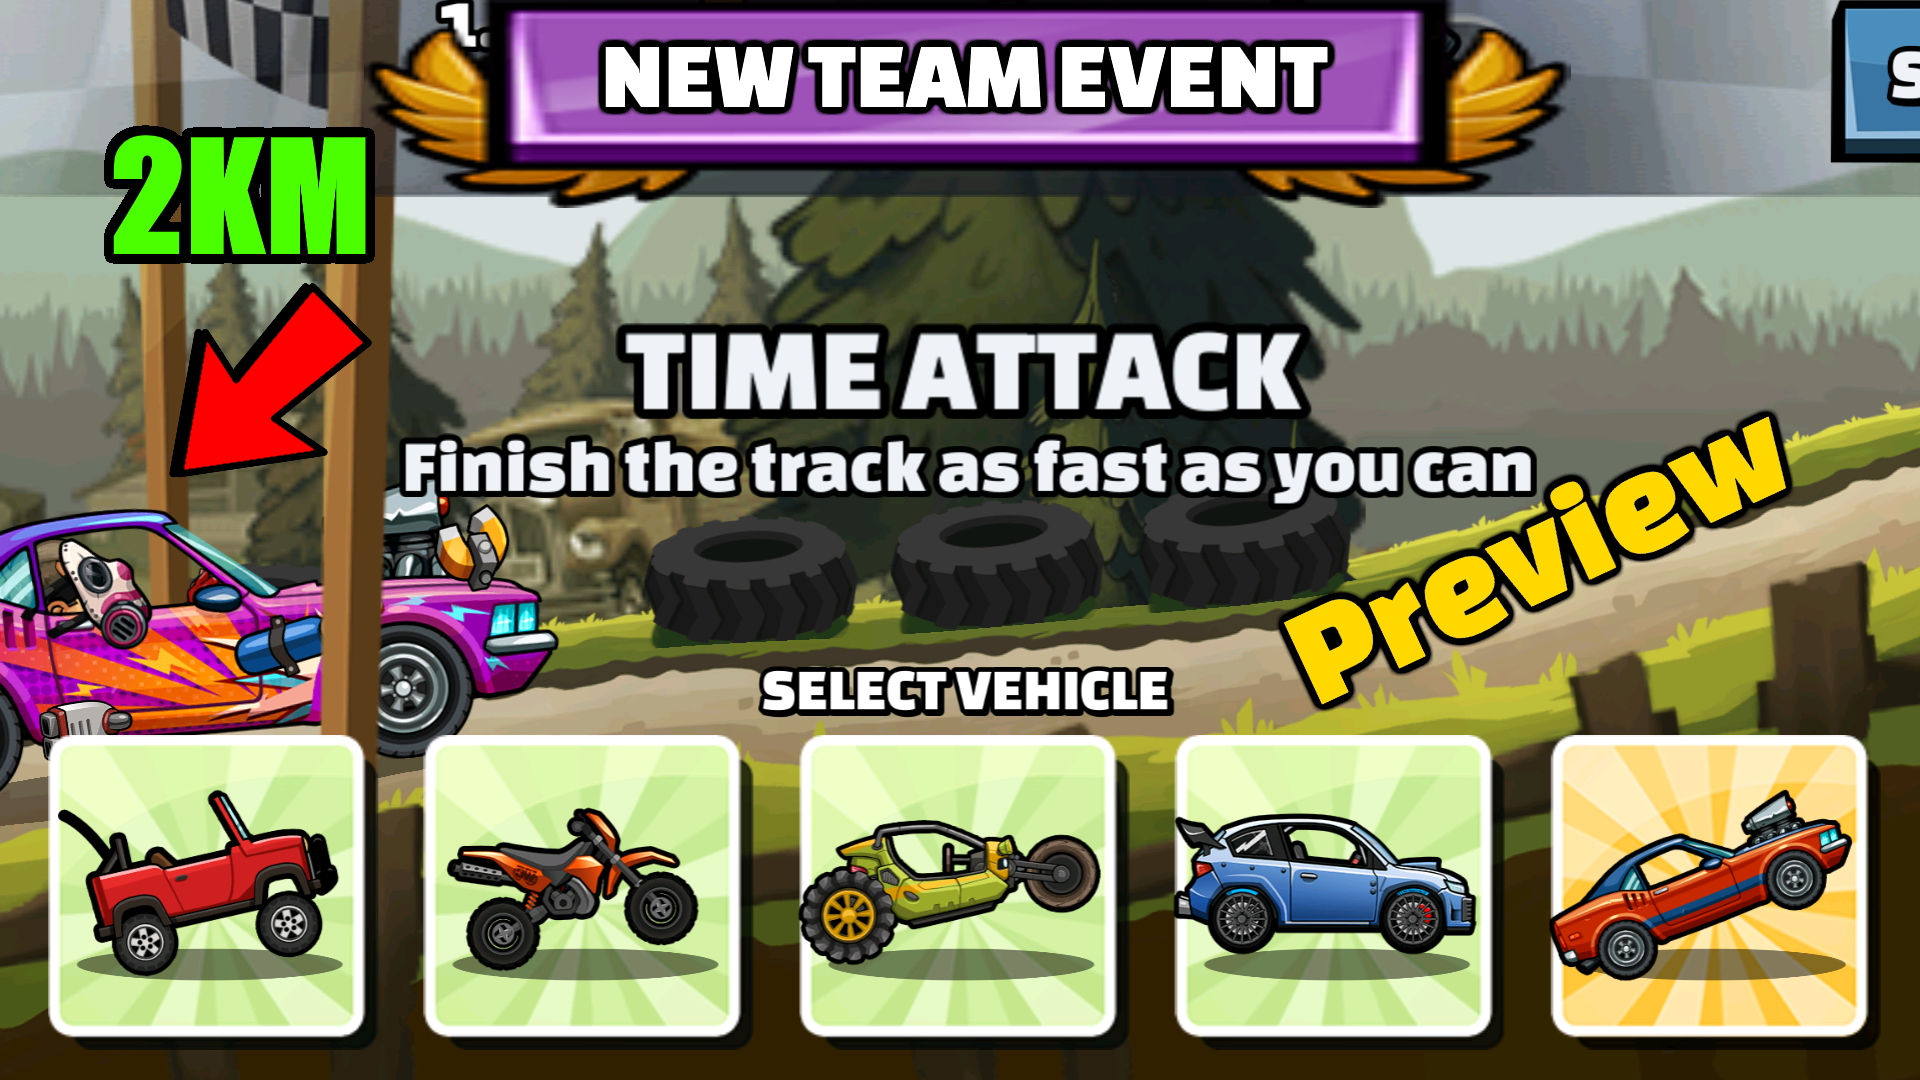 Hill Climb Racing 2 - New Team Event (Just Wing It), Vokope